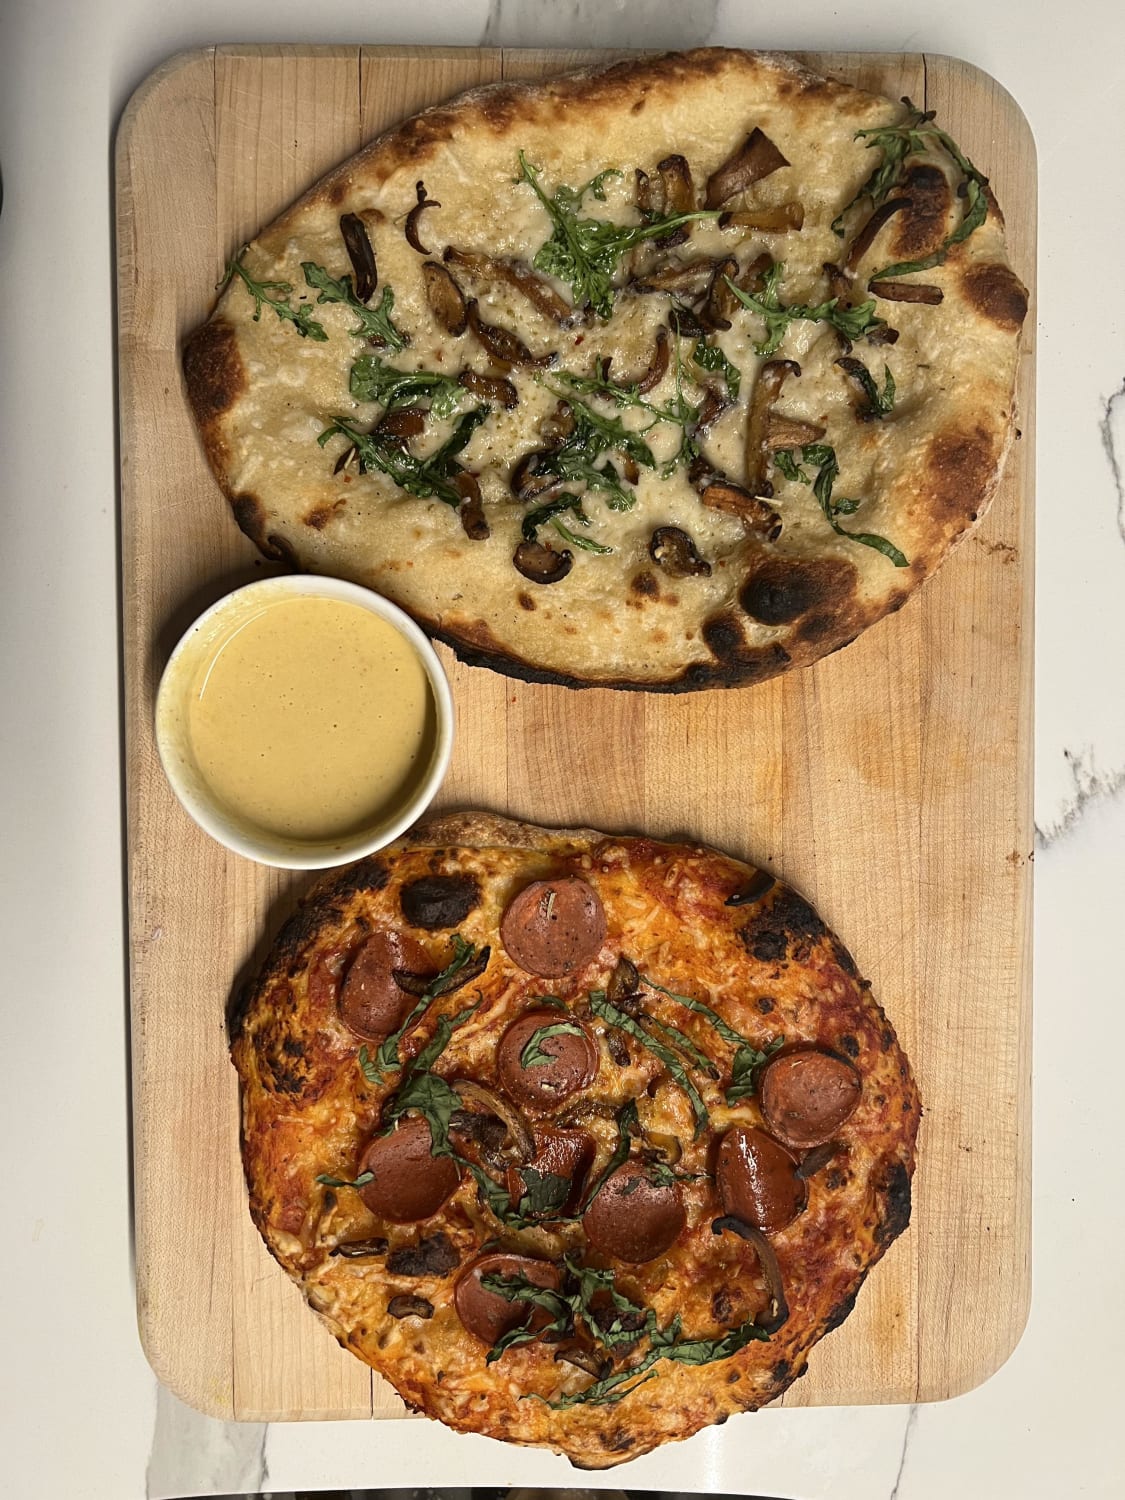 Homemade Ooni pizza two ways